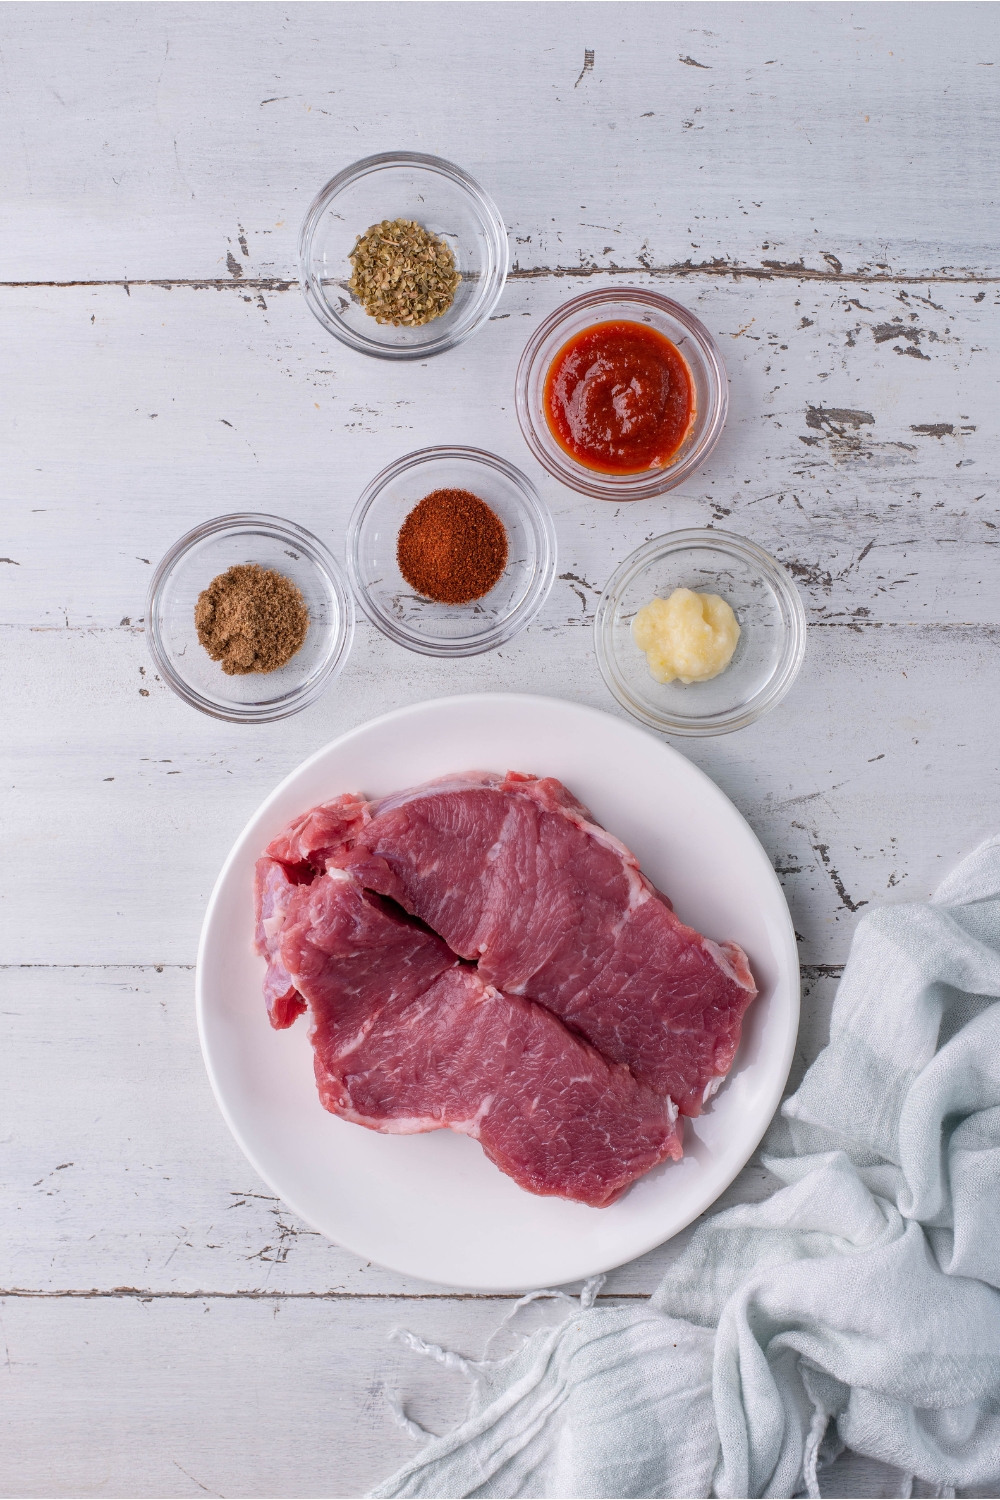 An assortment of ingredients including a plate of raw steak and bowls of spices.